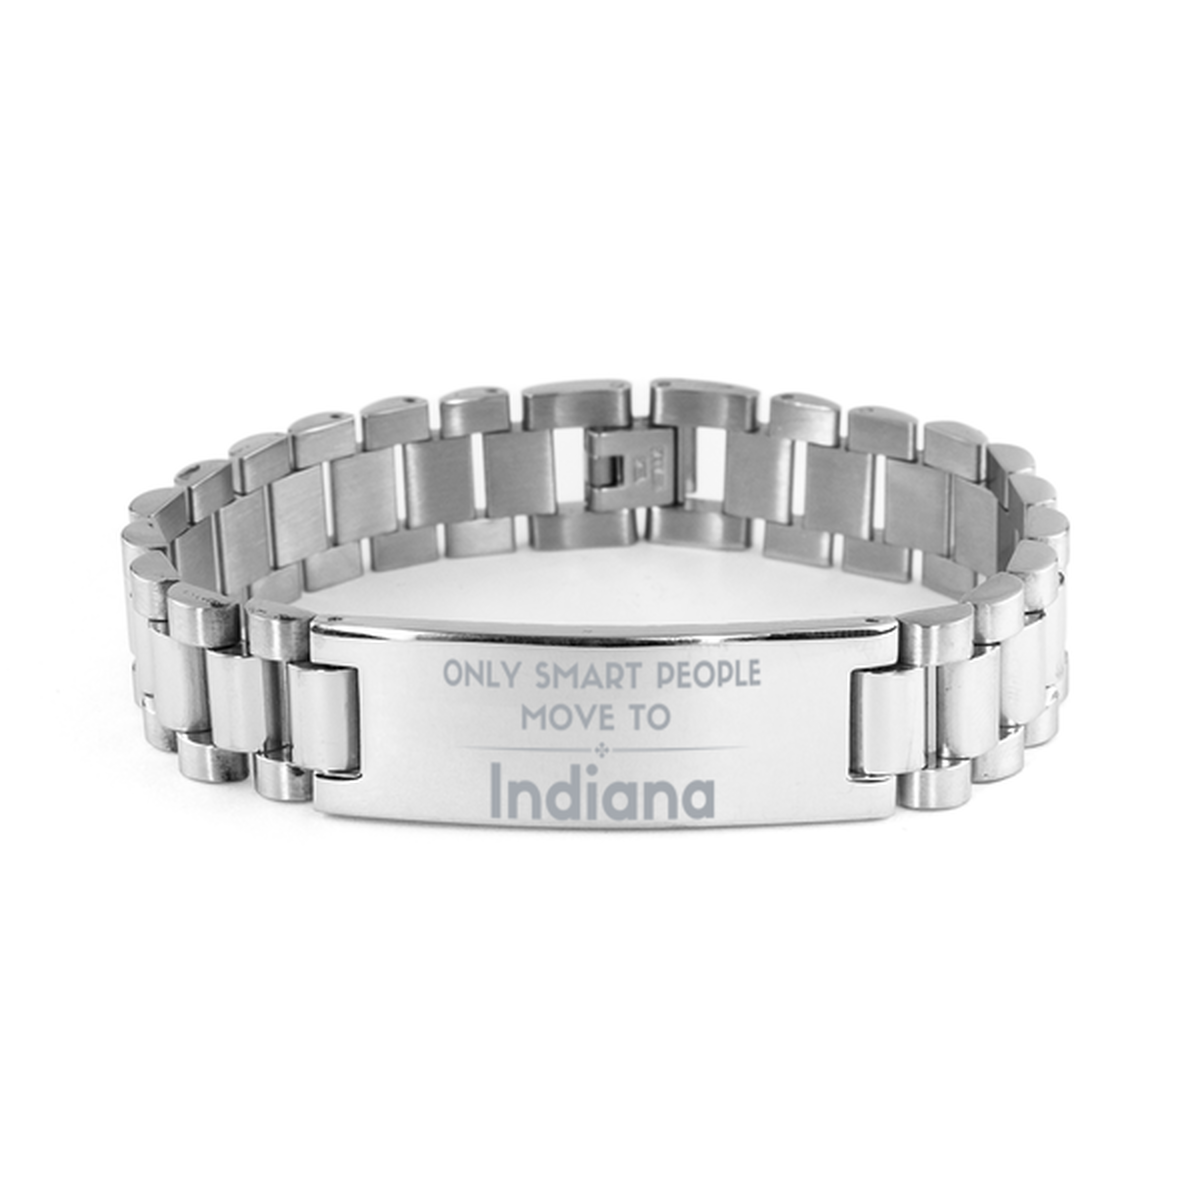 Only smart people move to Indiana Ladder Stainless Steel Bracelet, Gag Gifts For Indiana, Move to Indiana Gifts for Friends Coworker Funny Saying Quote